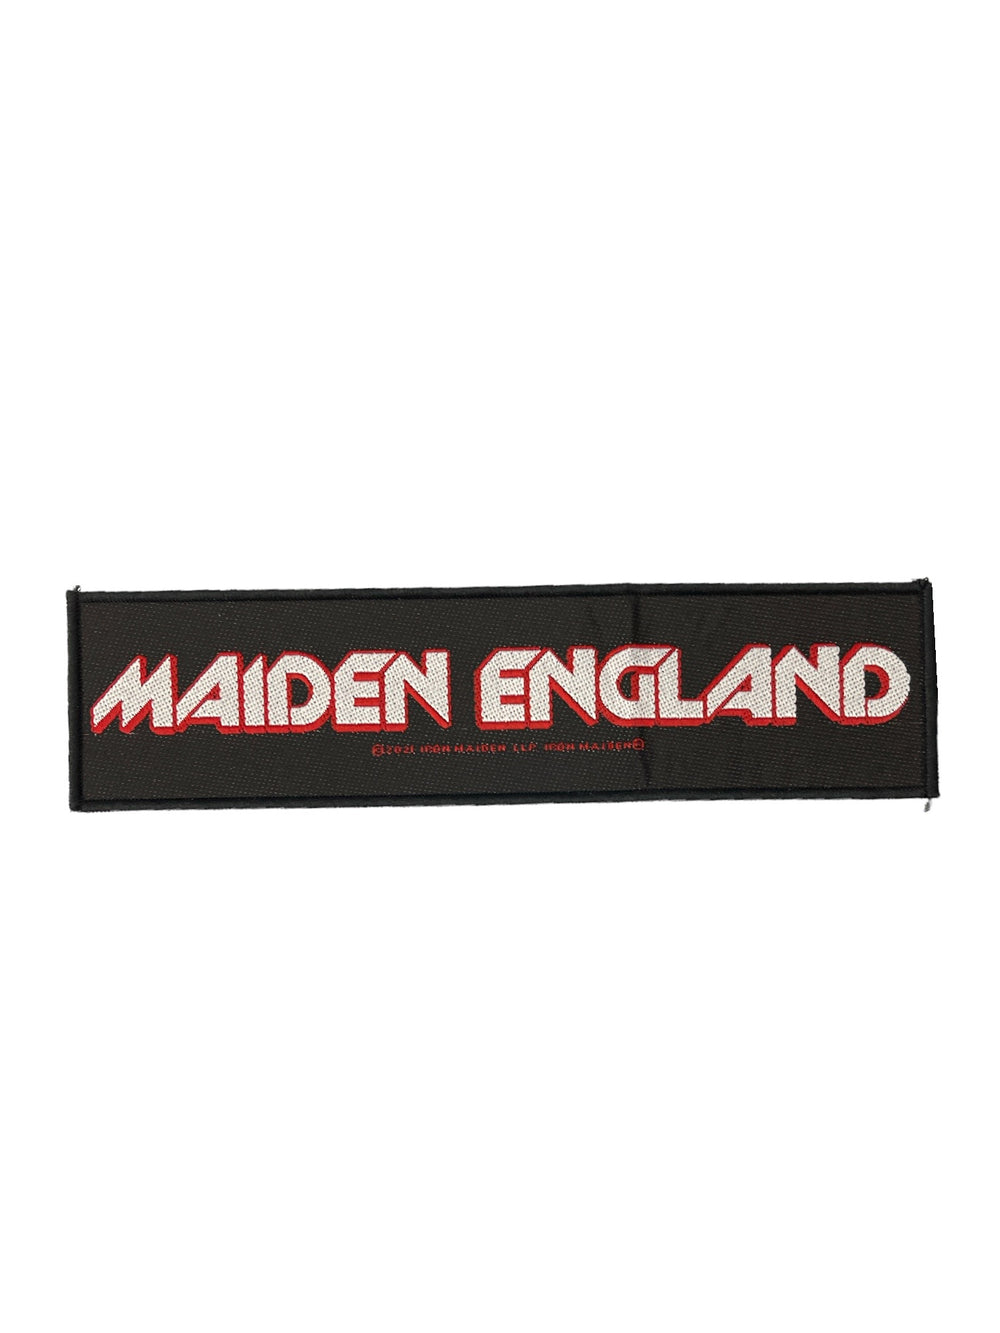 Iron Maiden Super Strip Patch: Maiden England Official Woven Patch Brand New